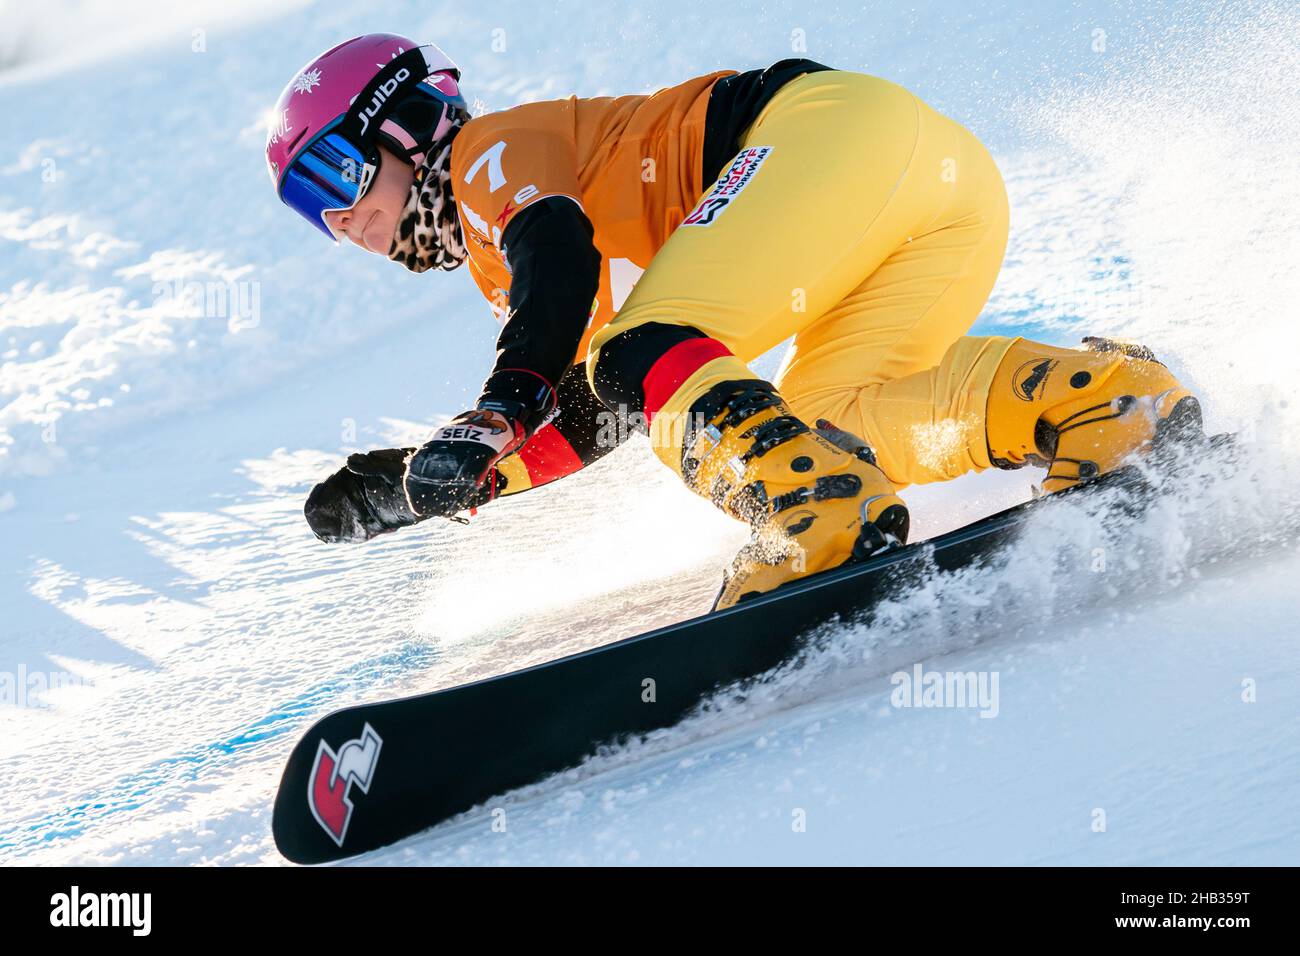 HOFMEISTER Ramona Theresia (GER) competing in the Fis Snowboard World Cup 2022 Womens Parallel Giant Slalom on the Pra Di Tori (Carezza) Course in the dolomite mountain range